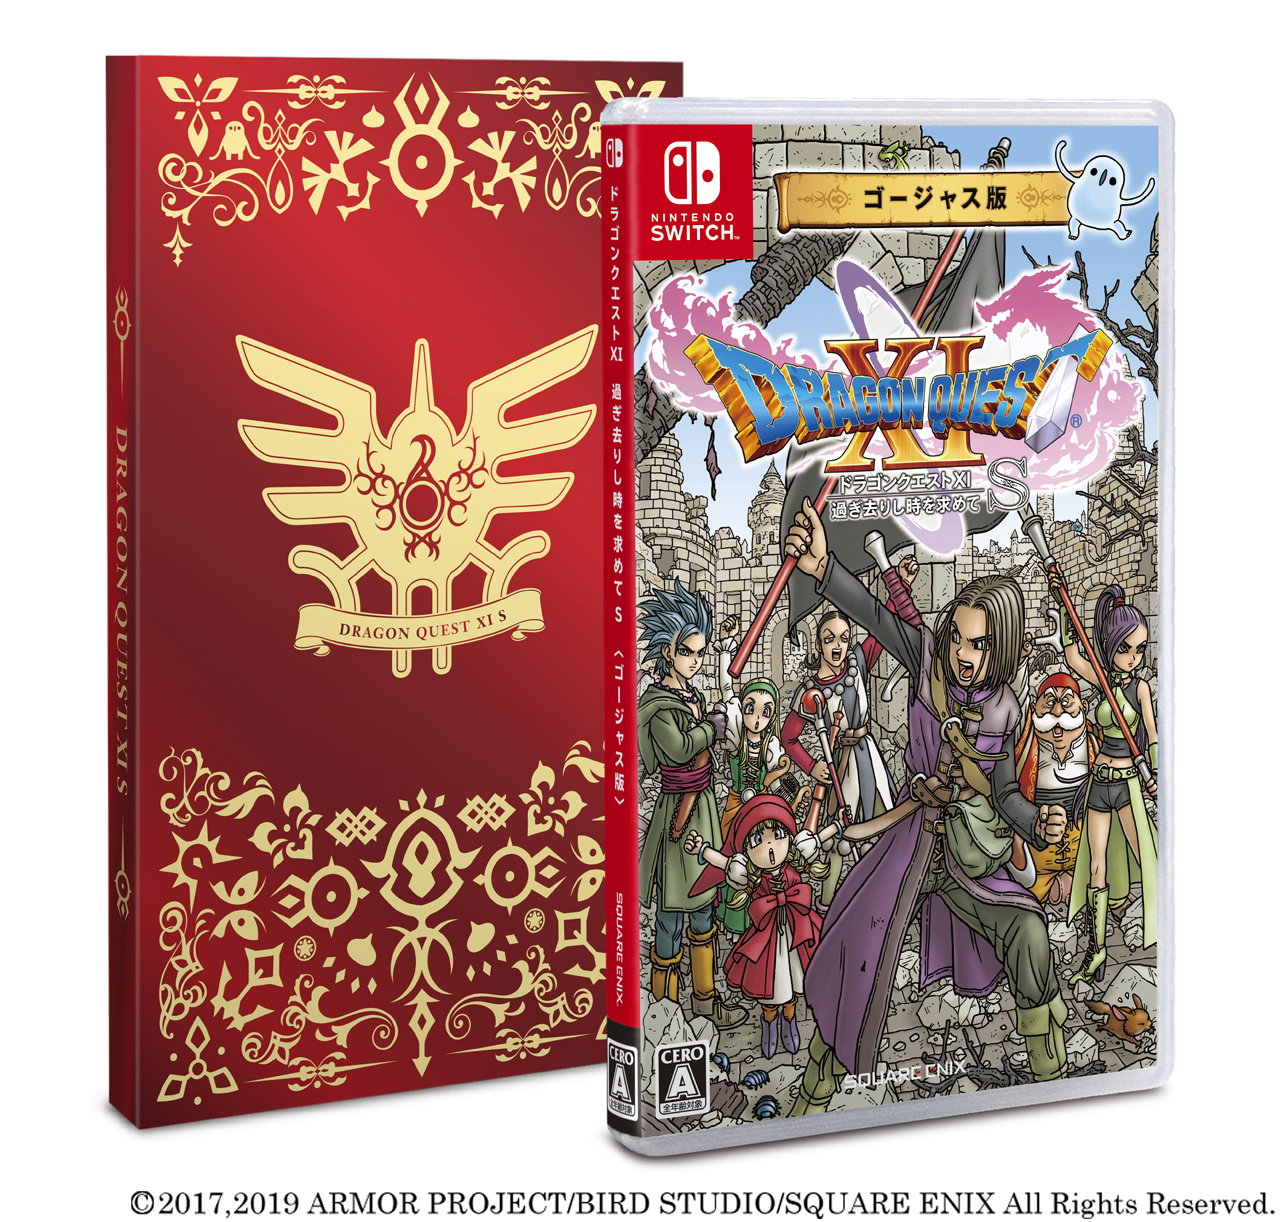 DRAGON QUEST XI S SQUARE ENIX OFFICIAL LIMITED SCRIPT COLLECTION BOOK Tracking 